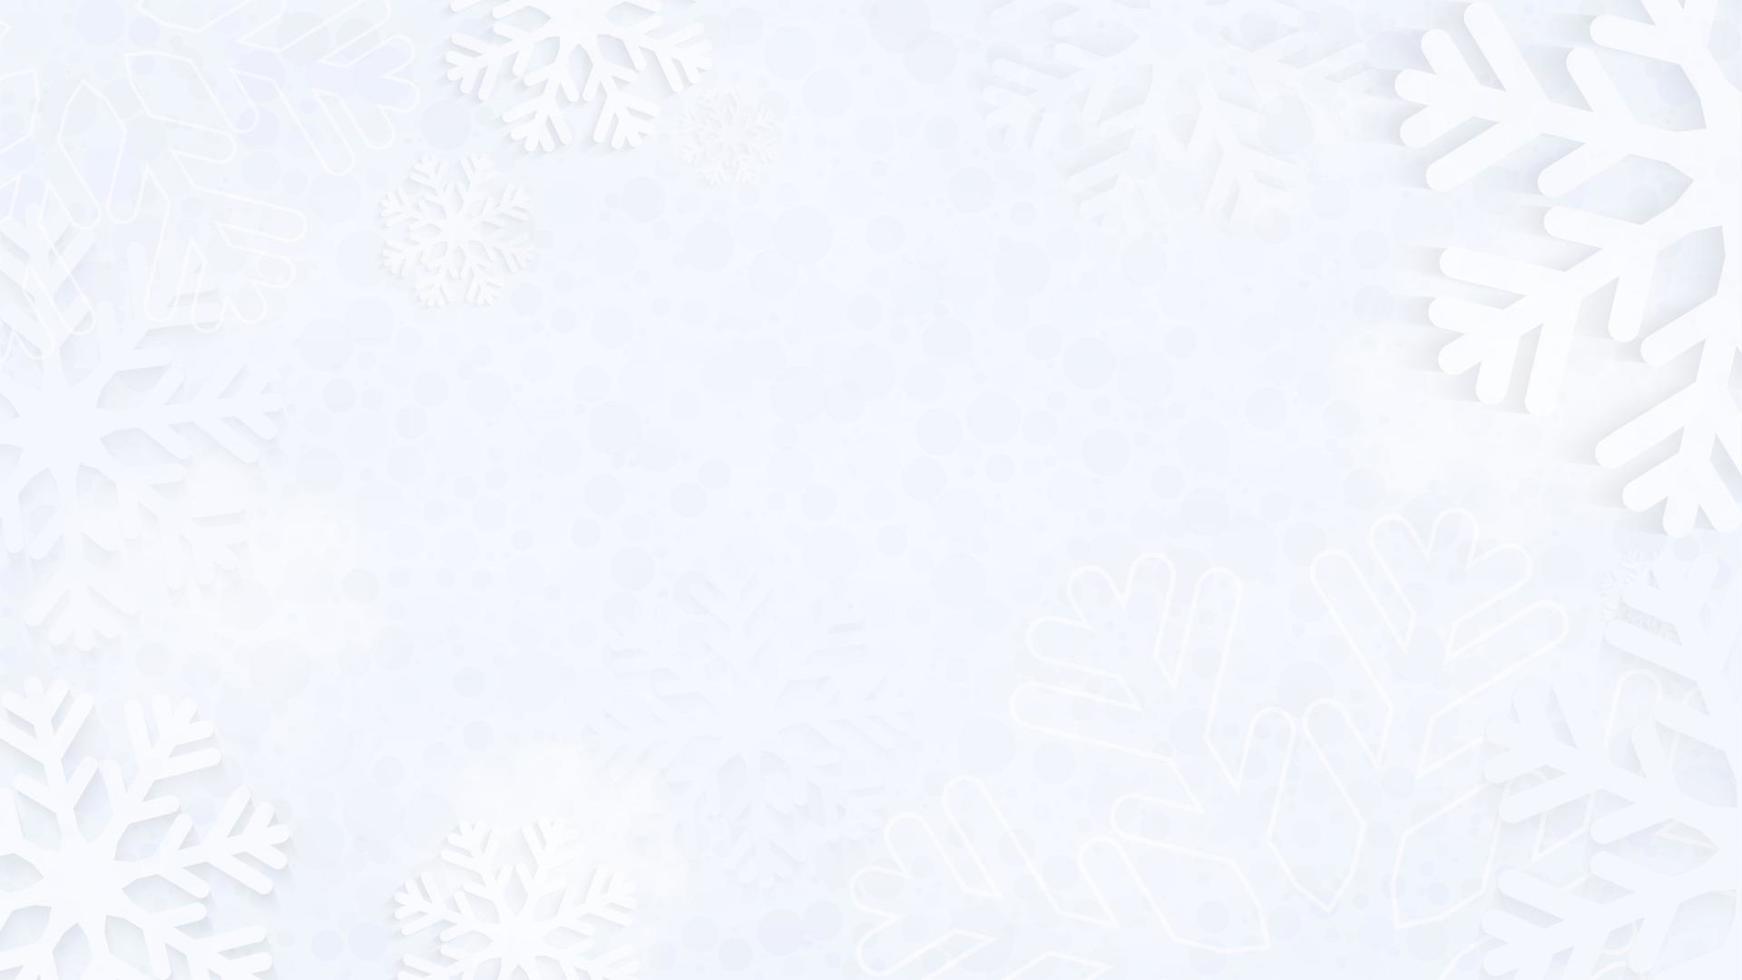 Abstract Christmas winter background with snowflakes, empty winter background. vector